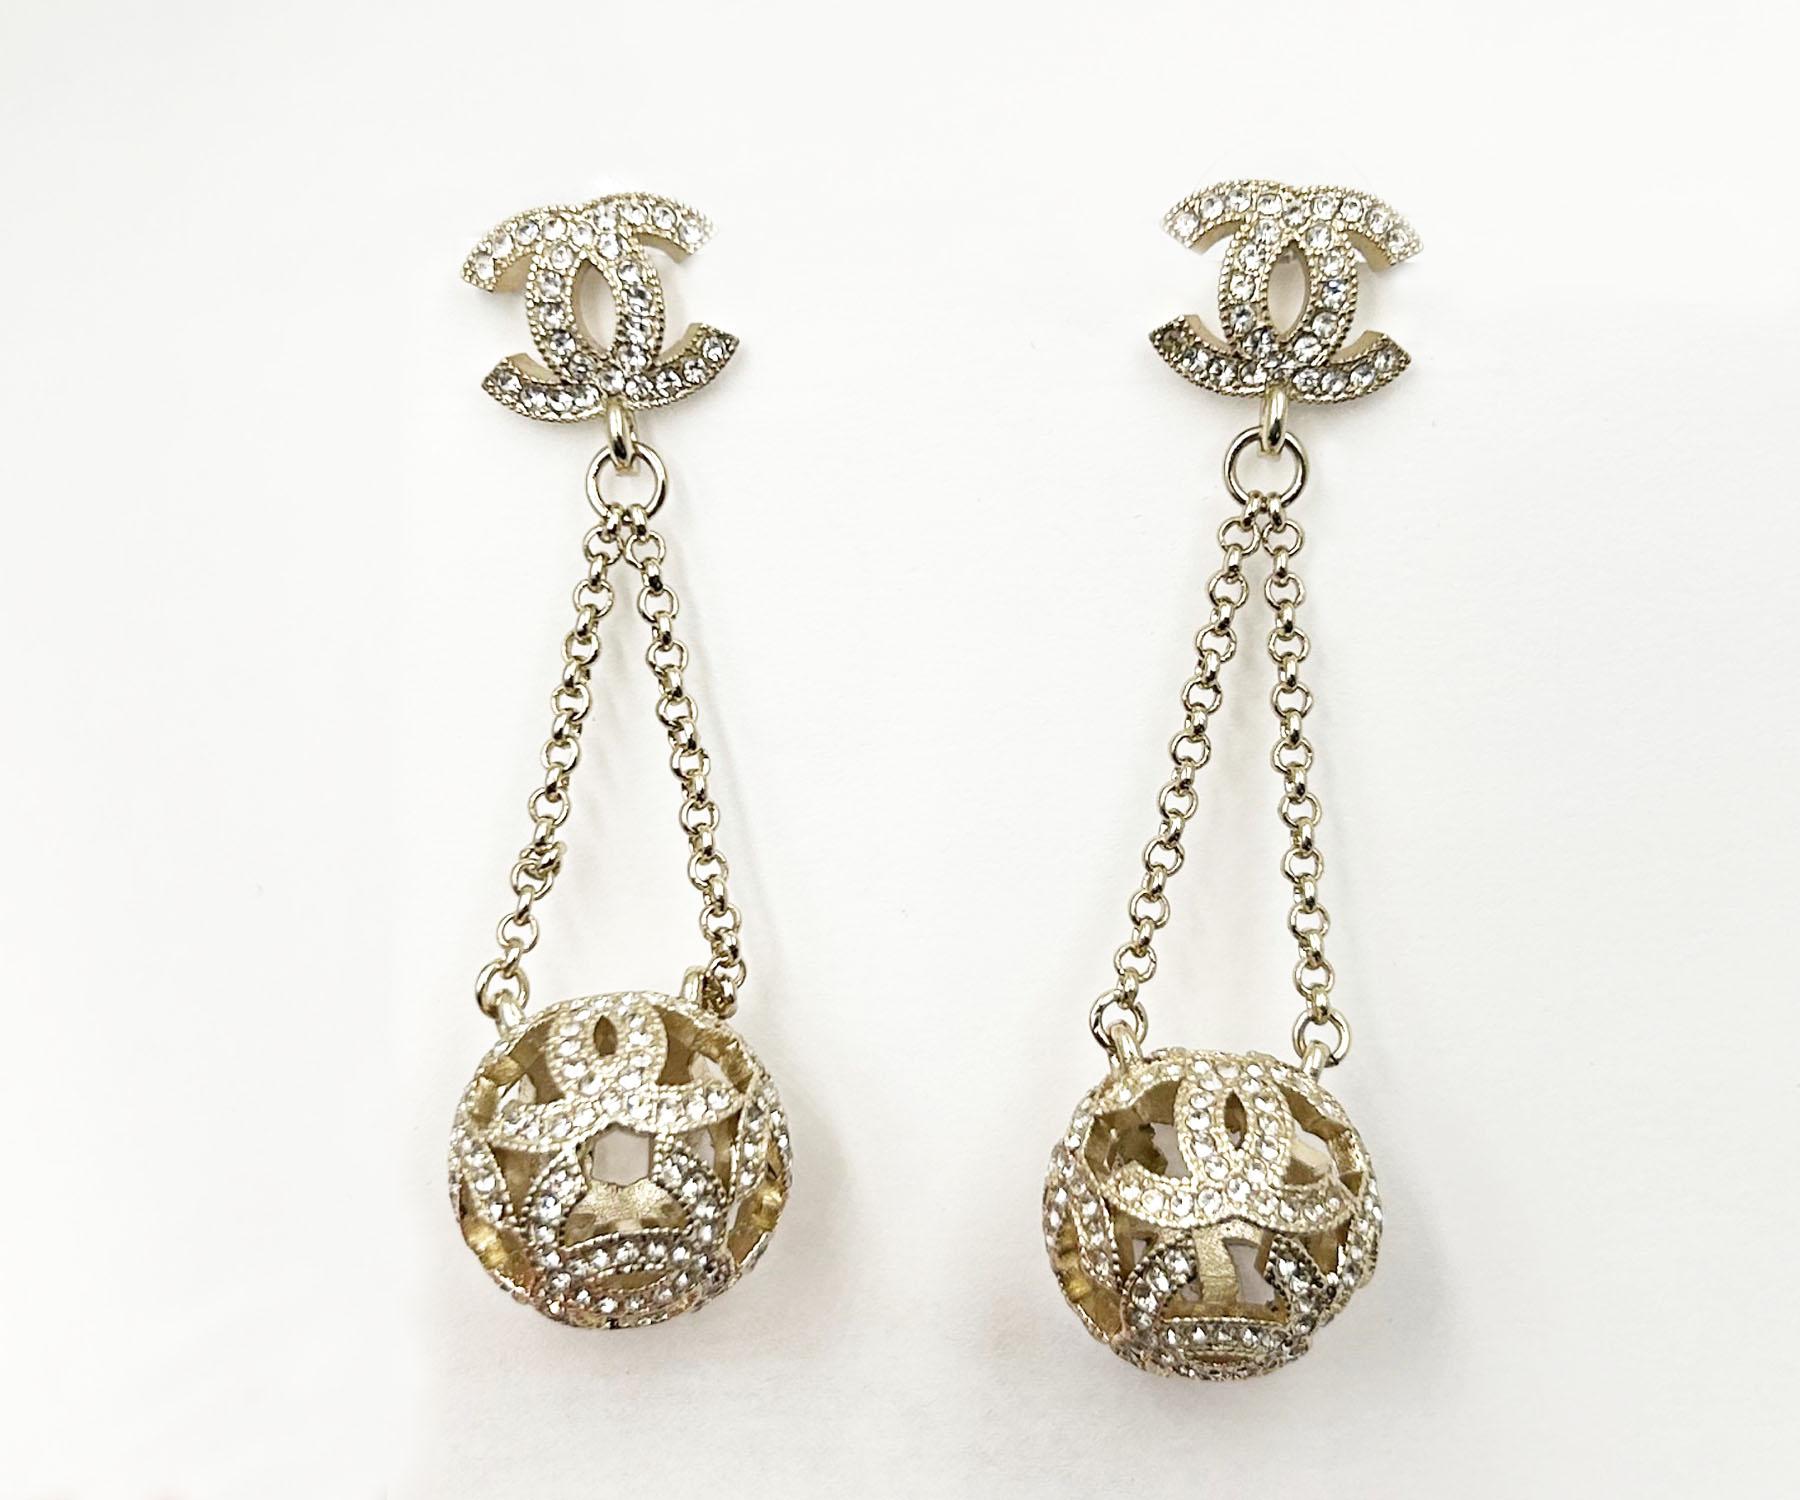 Chanel Gold CC Crystal Ball Dangle Piercing Earrings

*Marked 18
*Made in Italy
*Comes with the original box and pouch

-It's approximately 2.6